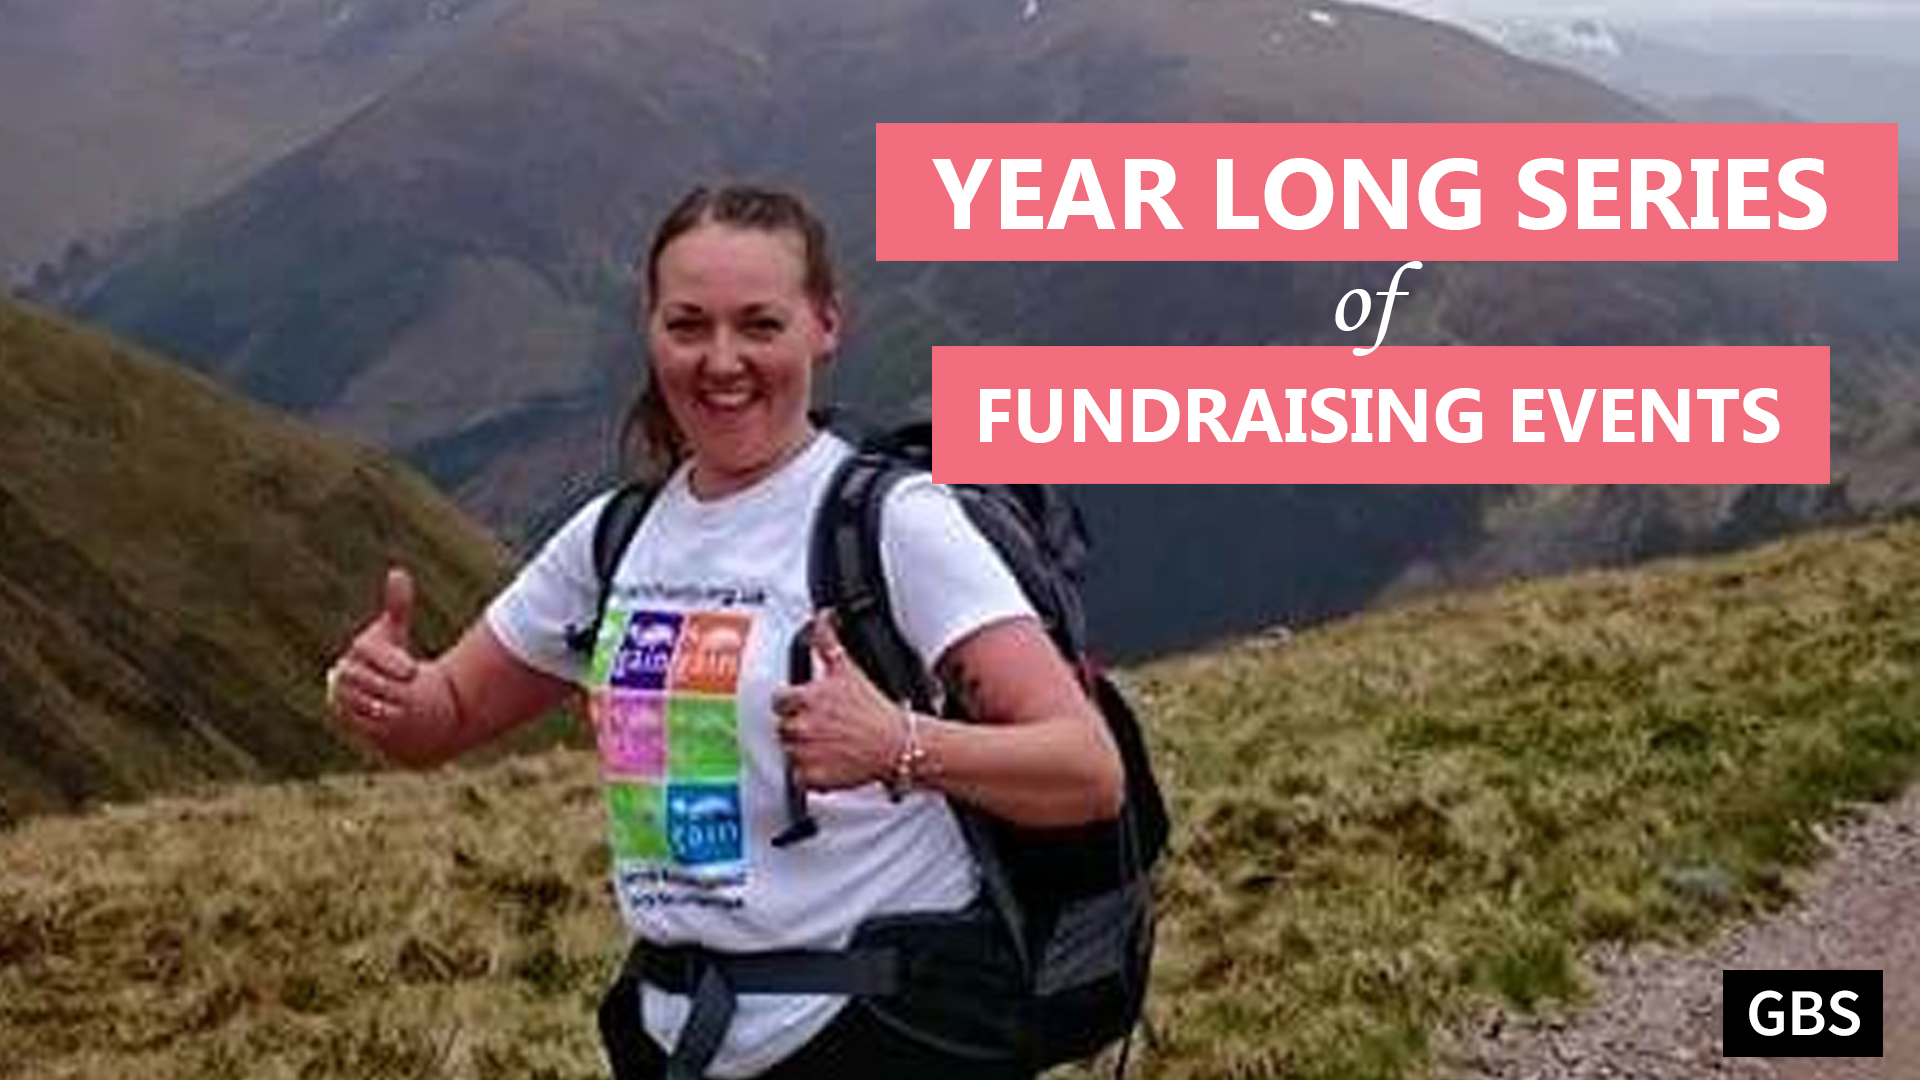 Year long series of fundraising events